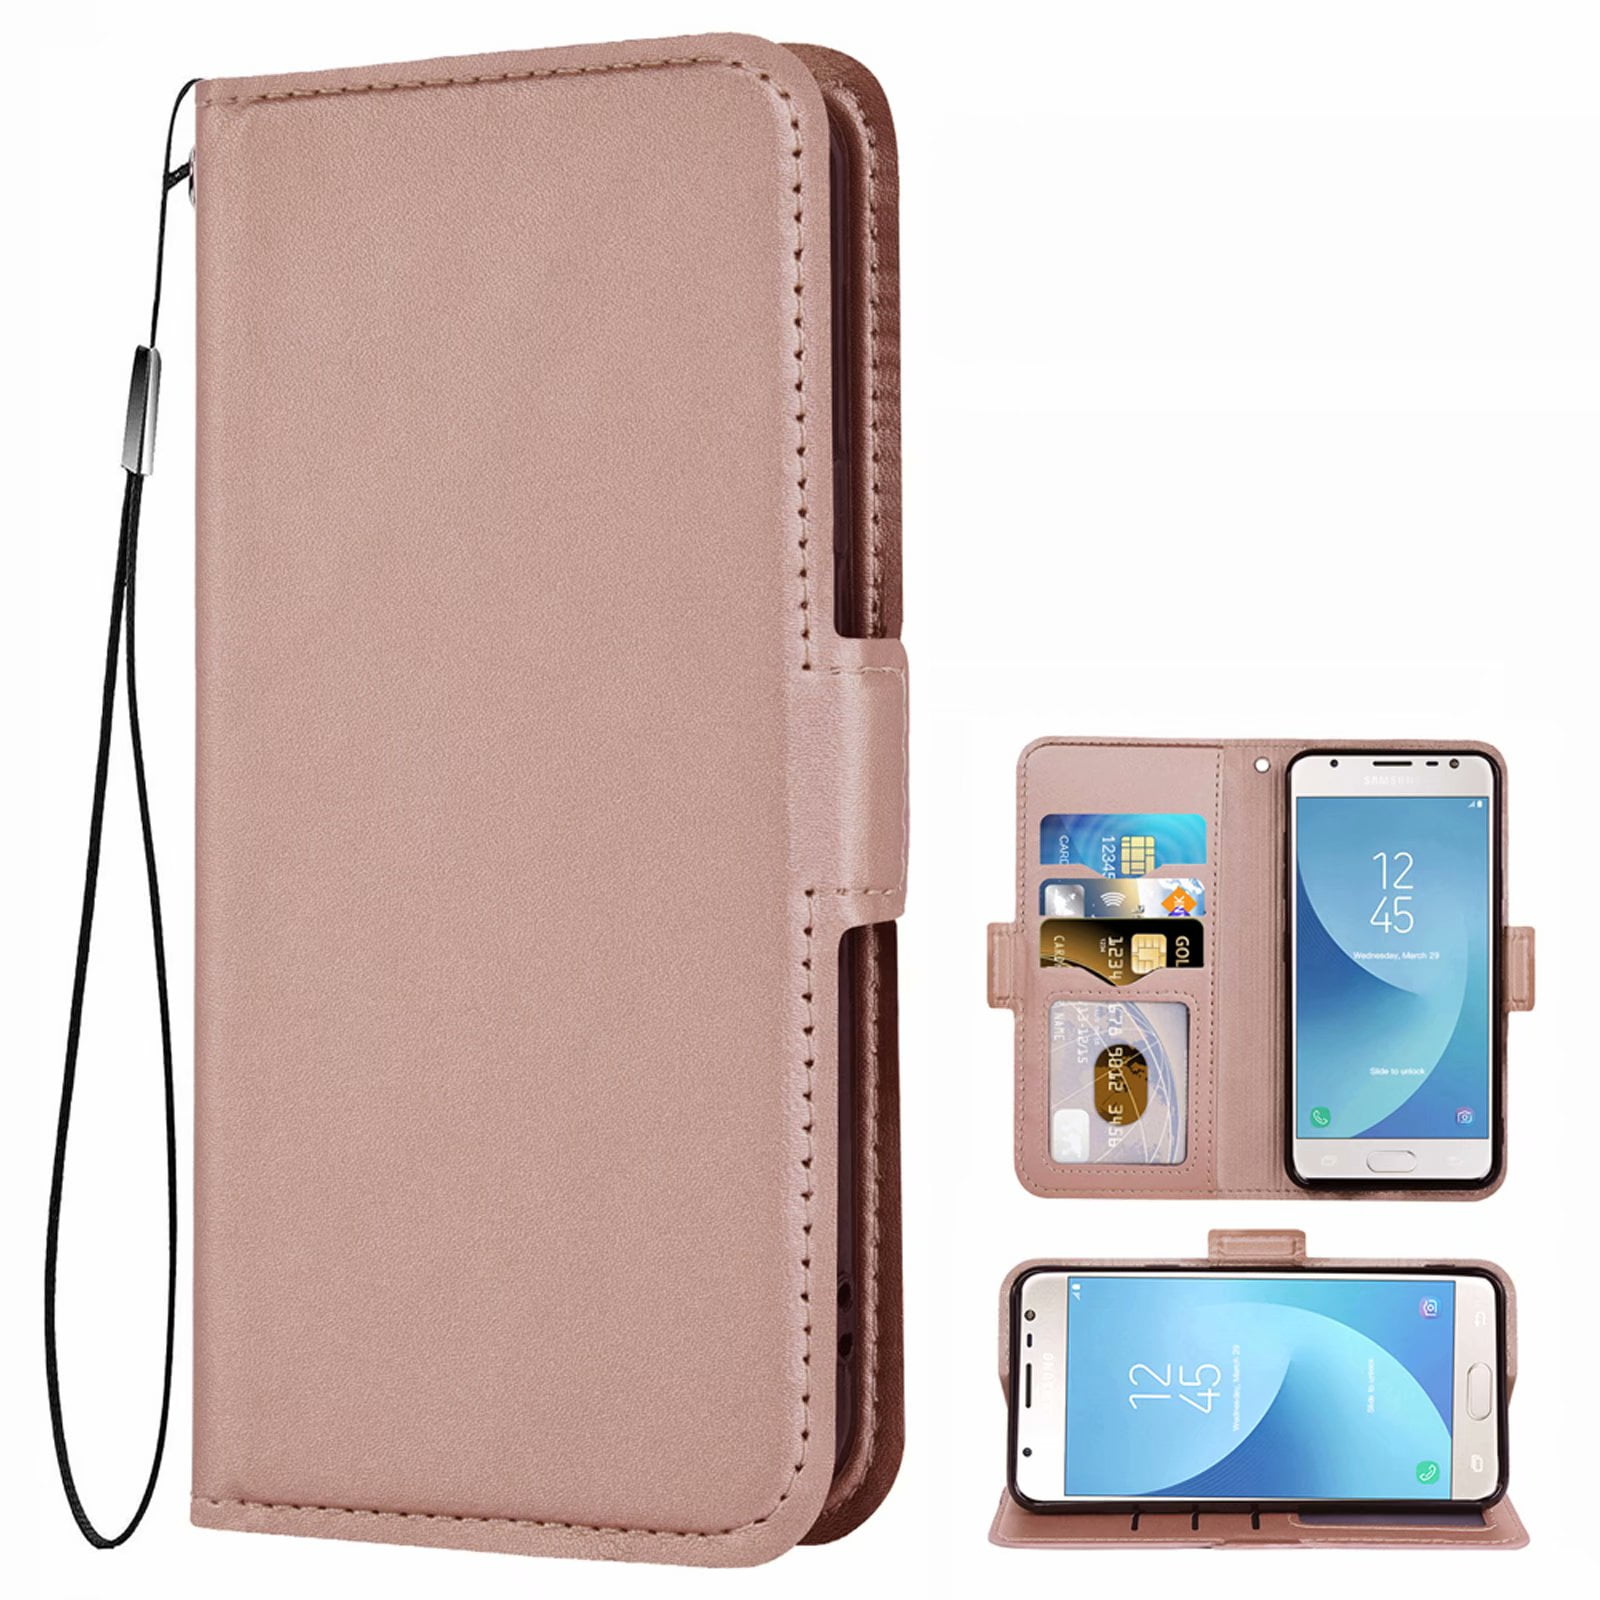 Flip Case for Samsung Galaxy A80/A90 Luxury Leather Bussiness Phone Case Cover for Bussiness Gifts with Free Waterproof Case 